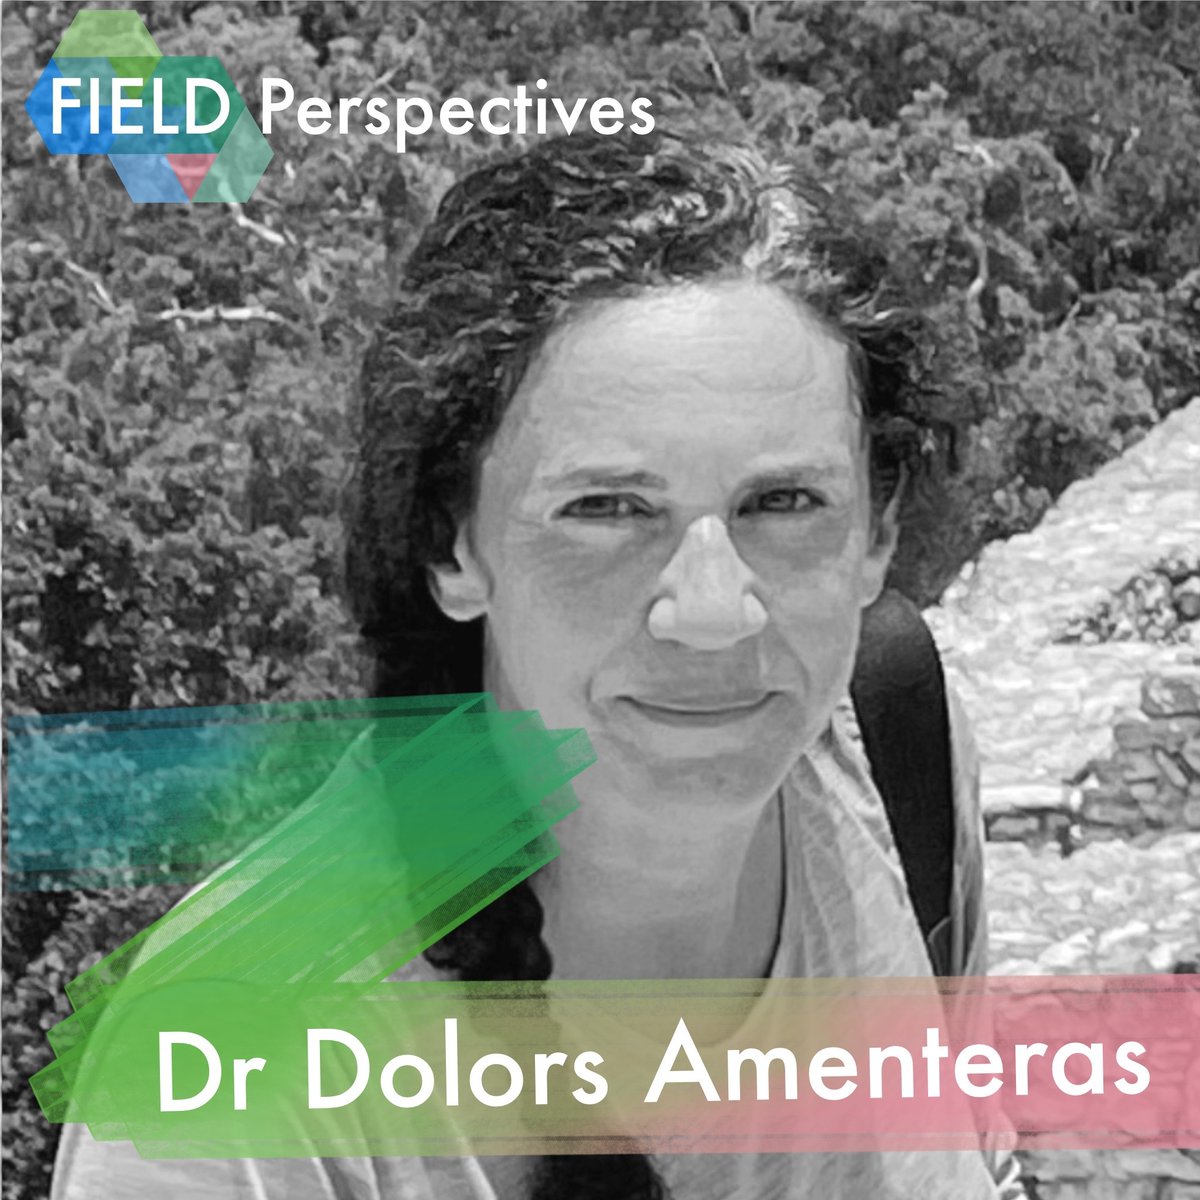 Outlook on recontextualising identity with fieldwork by @darmenteras ➡️fieldperspectives.org/DolorsArmenter… 'The problem is that often the research is not based on the needs on the ground, and that well-equipped researchers go to these sites and leave without investing in human capacity.'